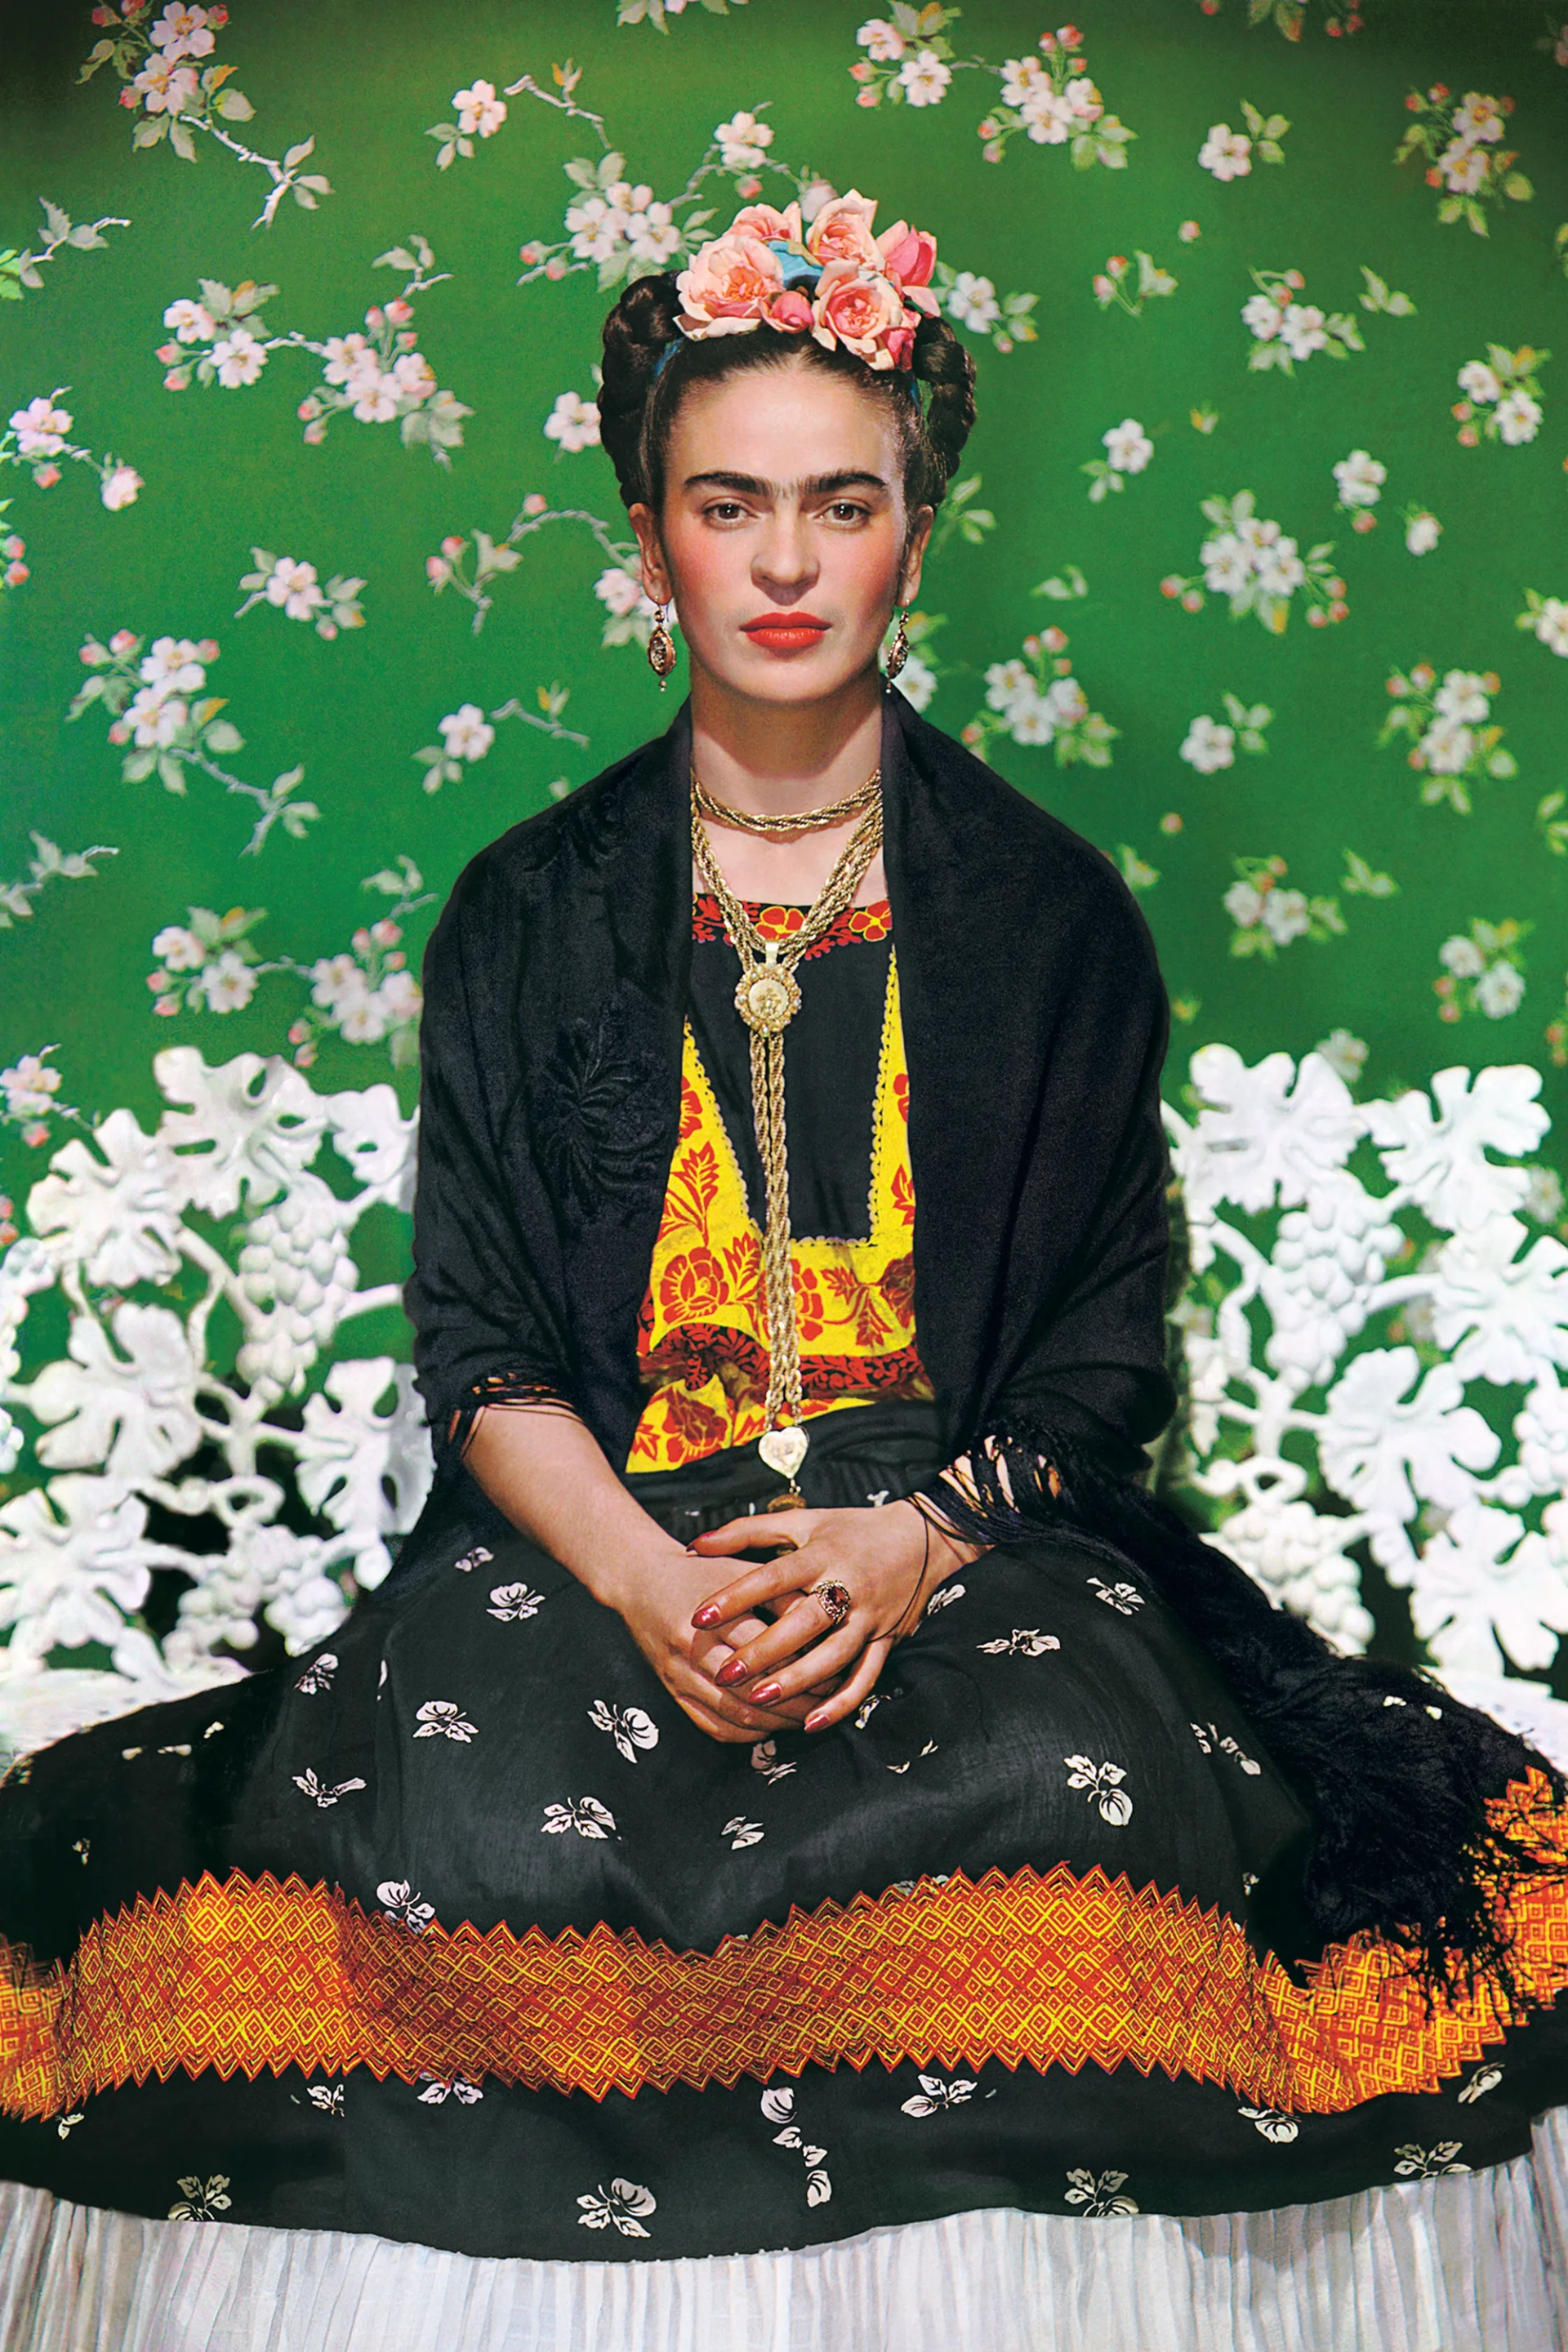 This image shows the artist Frida Kahlo against a bright green wall, staring defiantly at the camera as she is dressed in traditional Mexican attire.